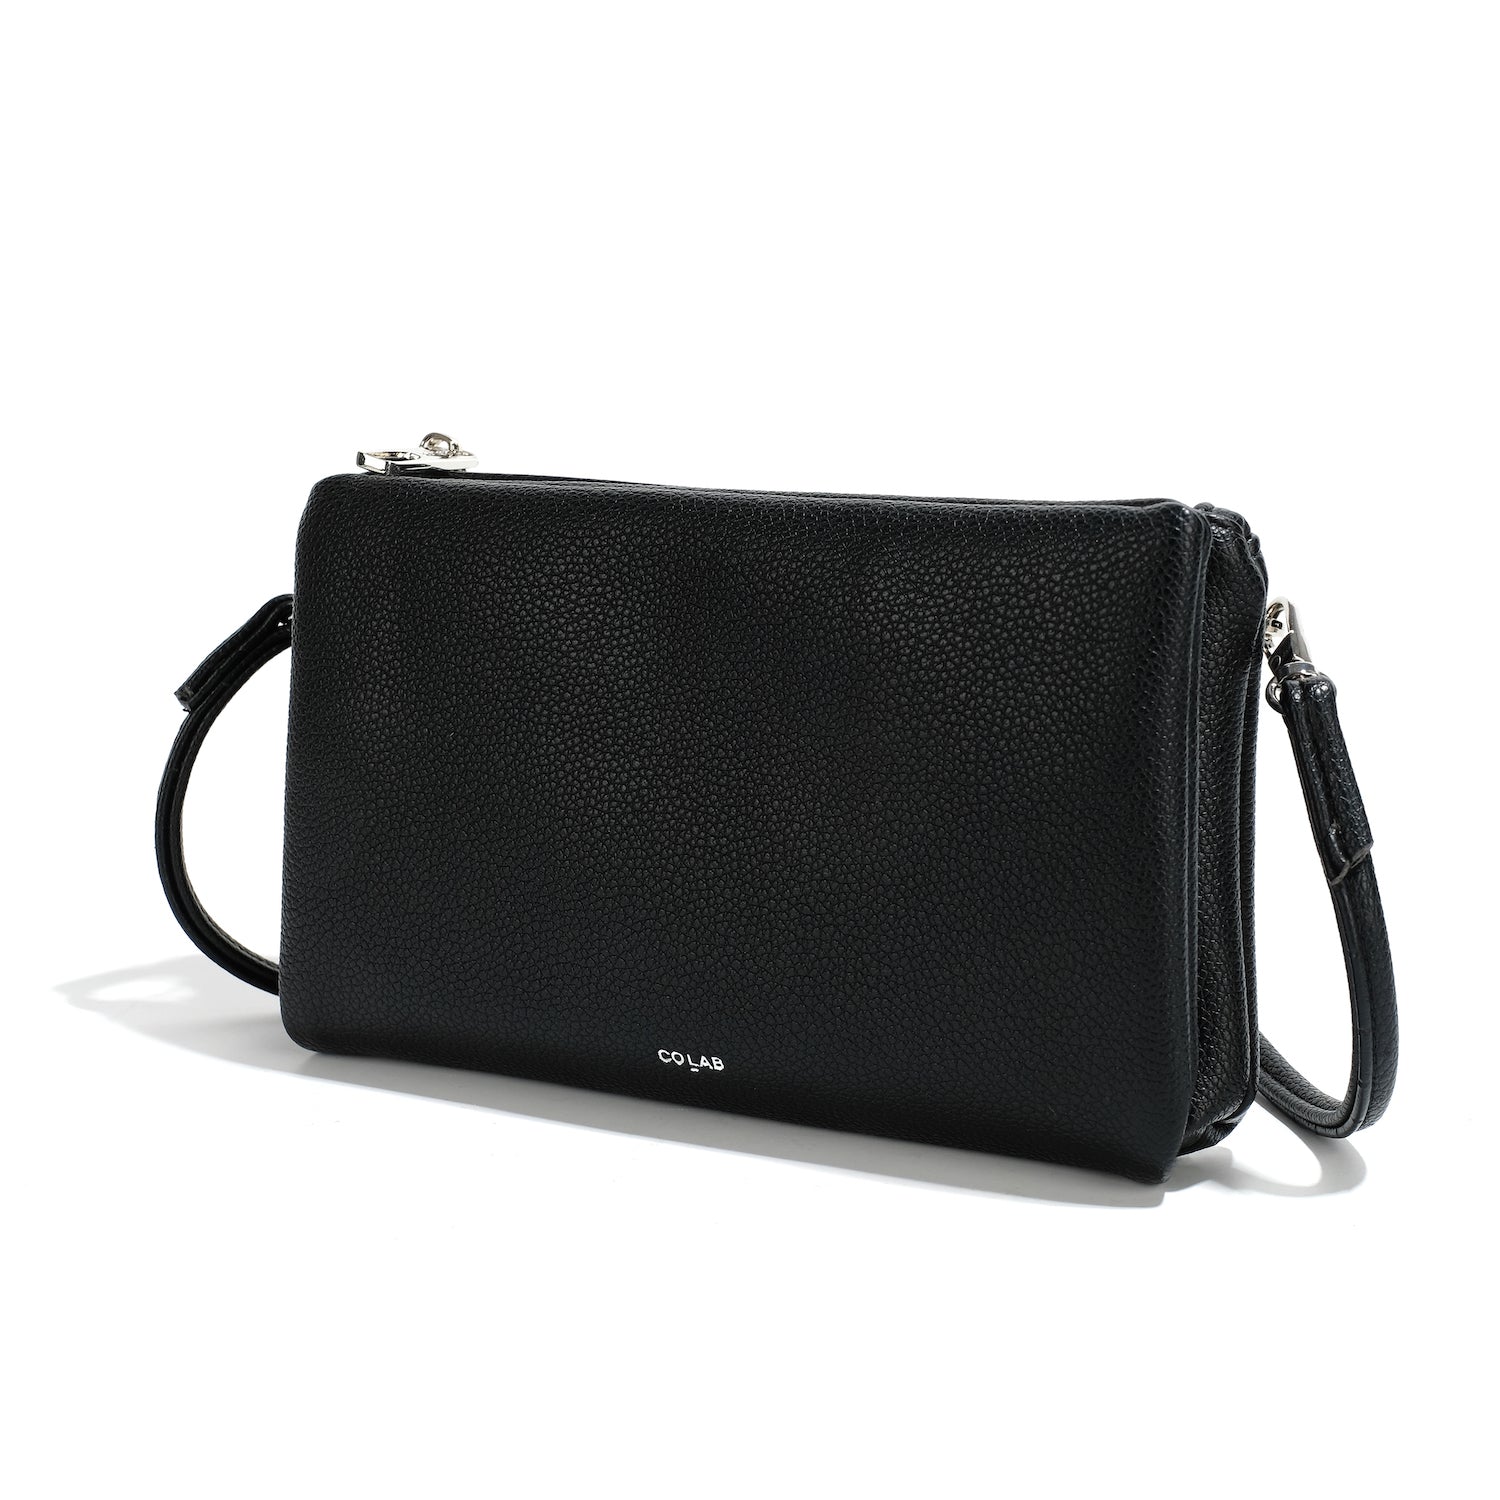 co-lab Lala Organizer - Black Accessories - Other Accessories - Handbags & Wallets by co-lab | Grace the Boutique